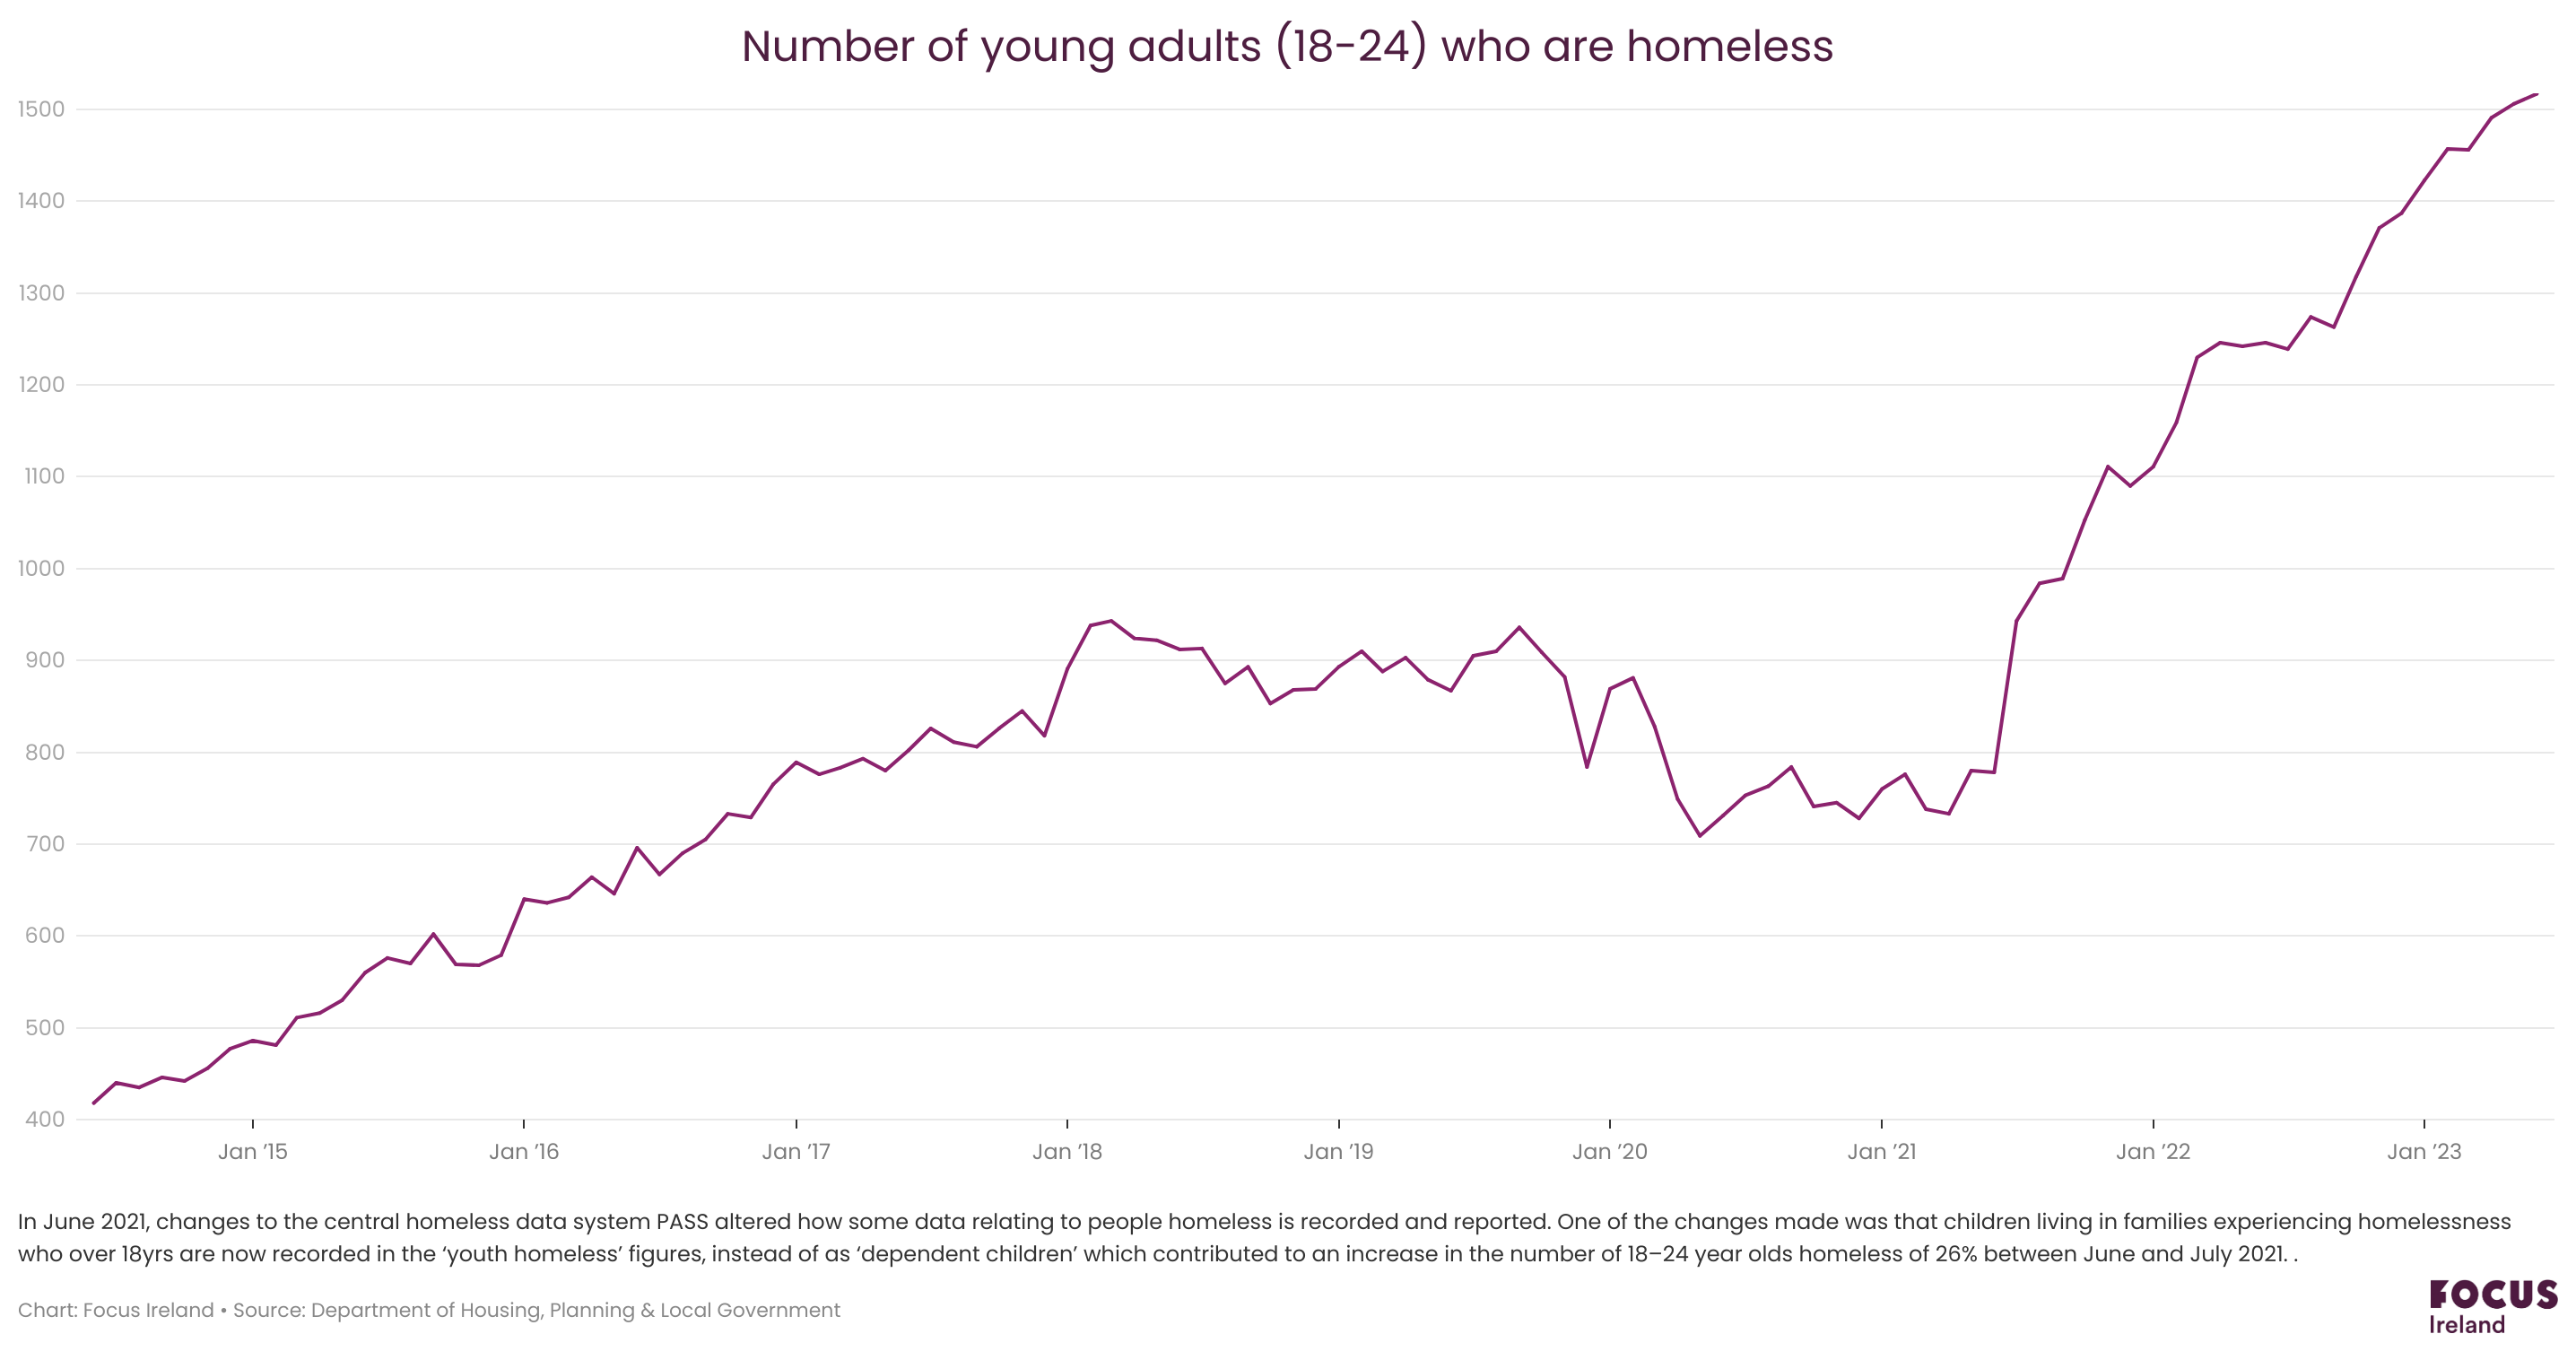 A graph that shows the rise in Youth homelessness (18-24 year old's) in Ireland. The number has risen from 400 in 2014 to 1500 in 2023.